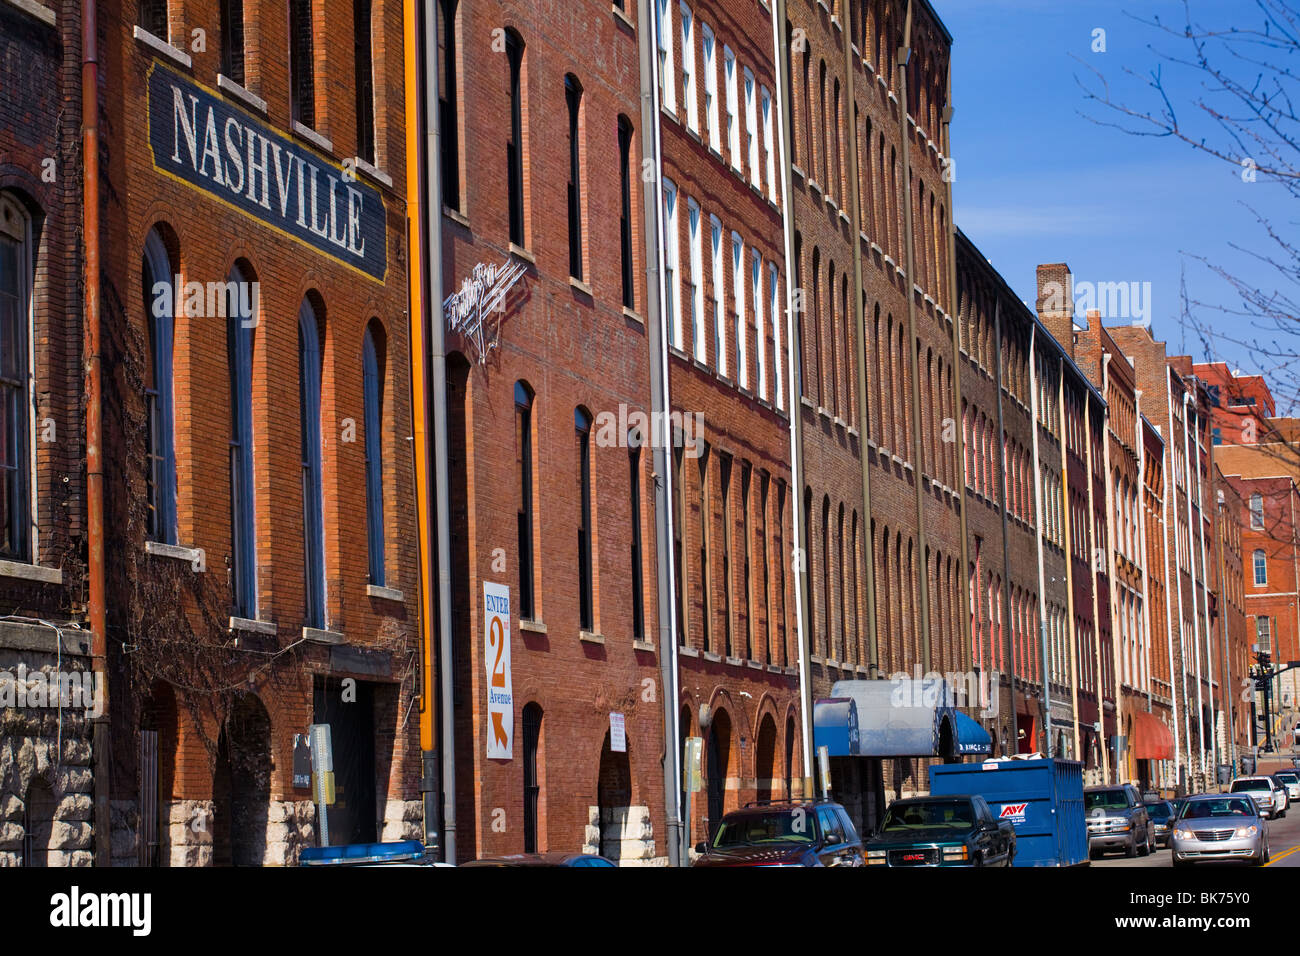 Riverfront architectural facades of Nashville, Tennessee Stock Photo